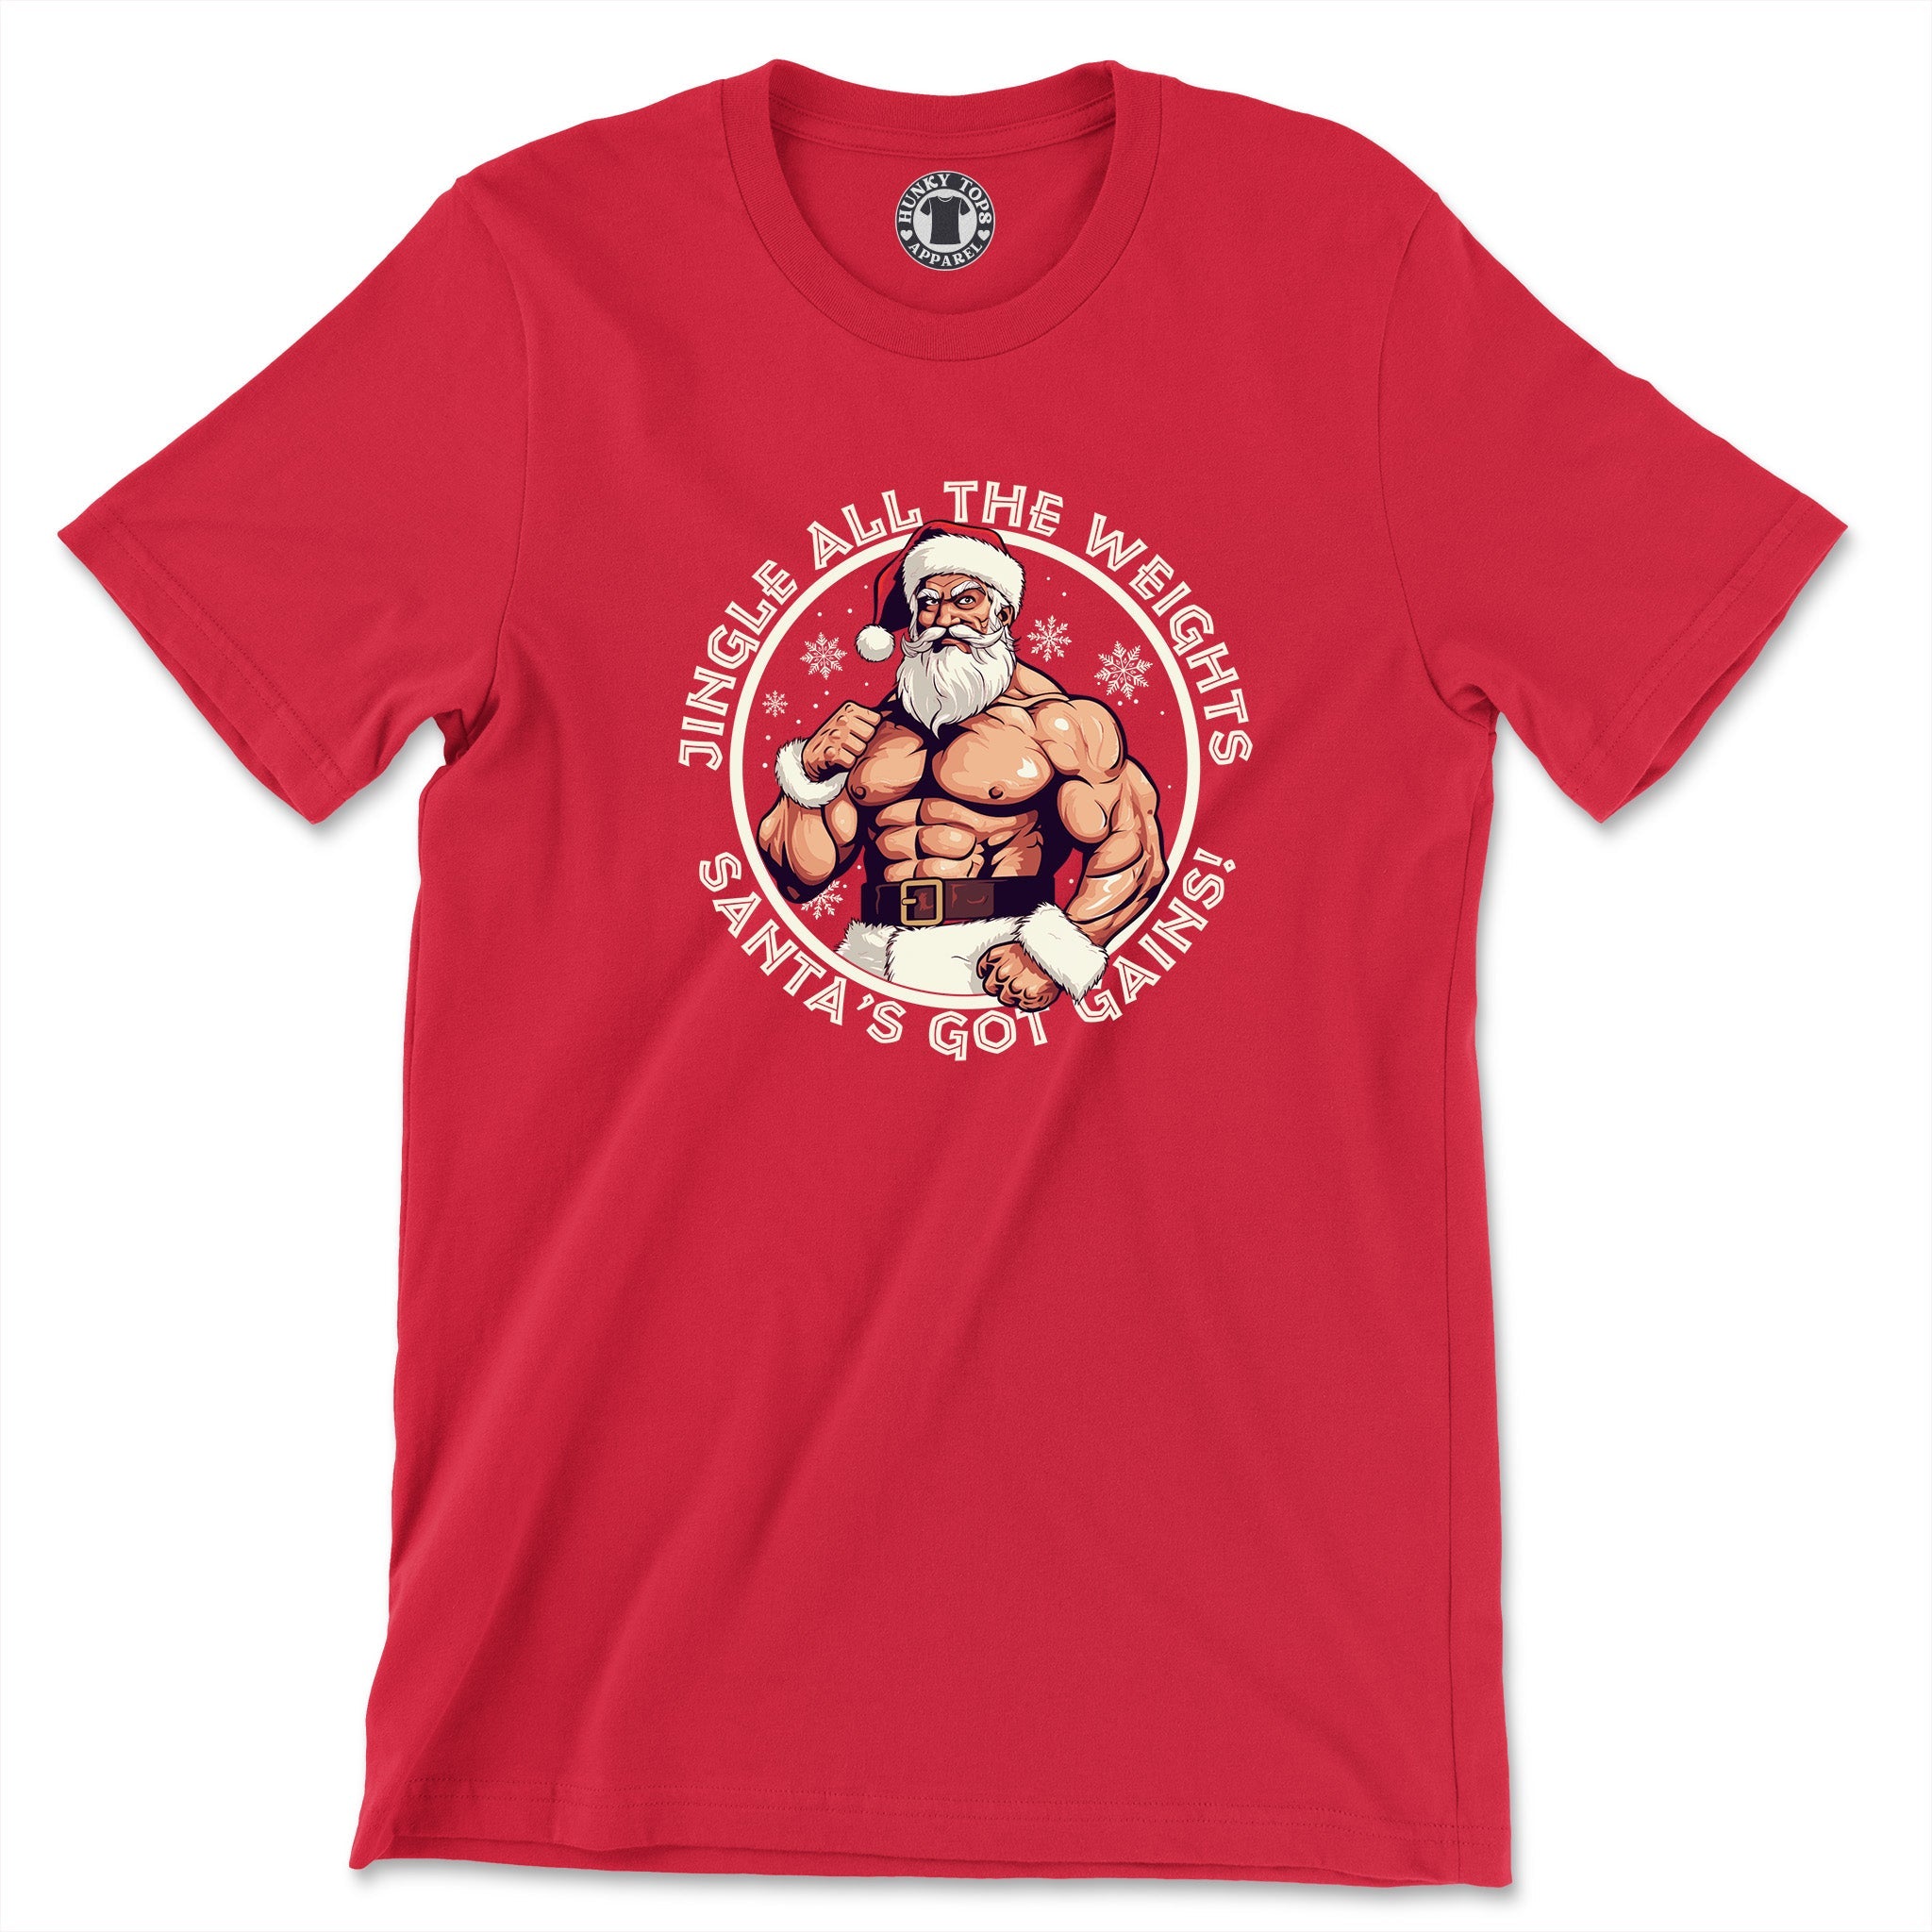 "Jingle All The Weights: Santa's Got Gains" Festive Fitness Tee - Hunky Tops